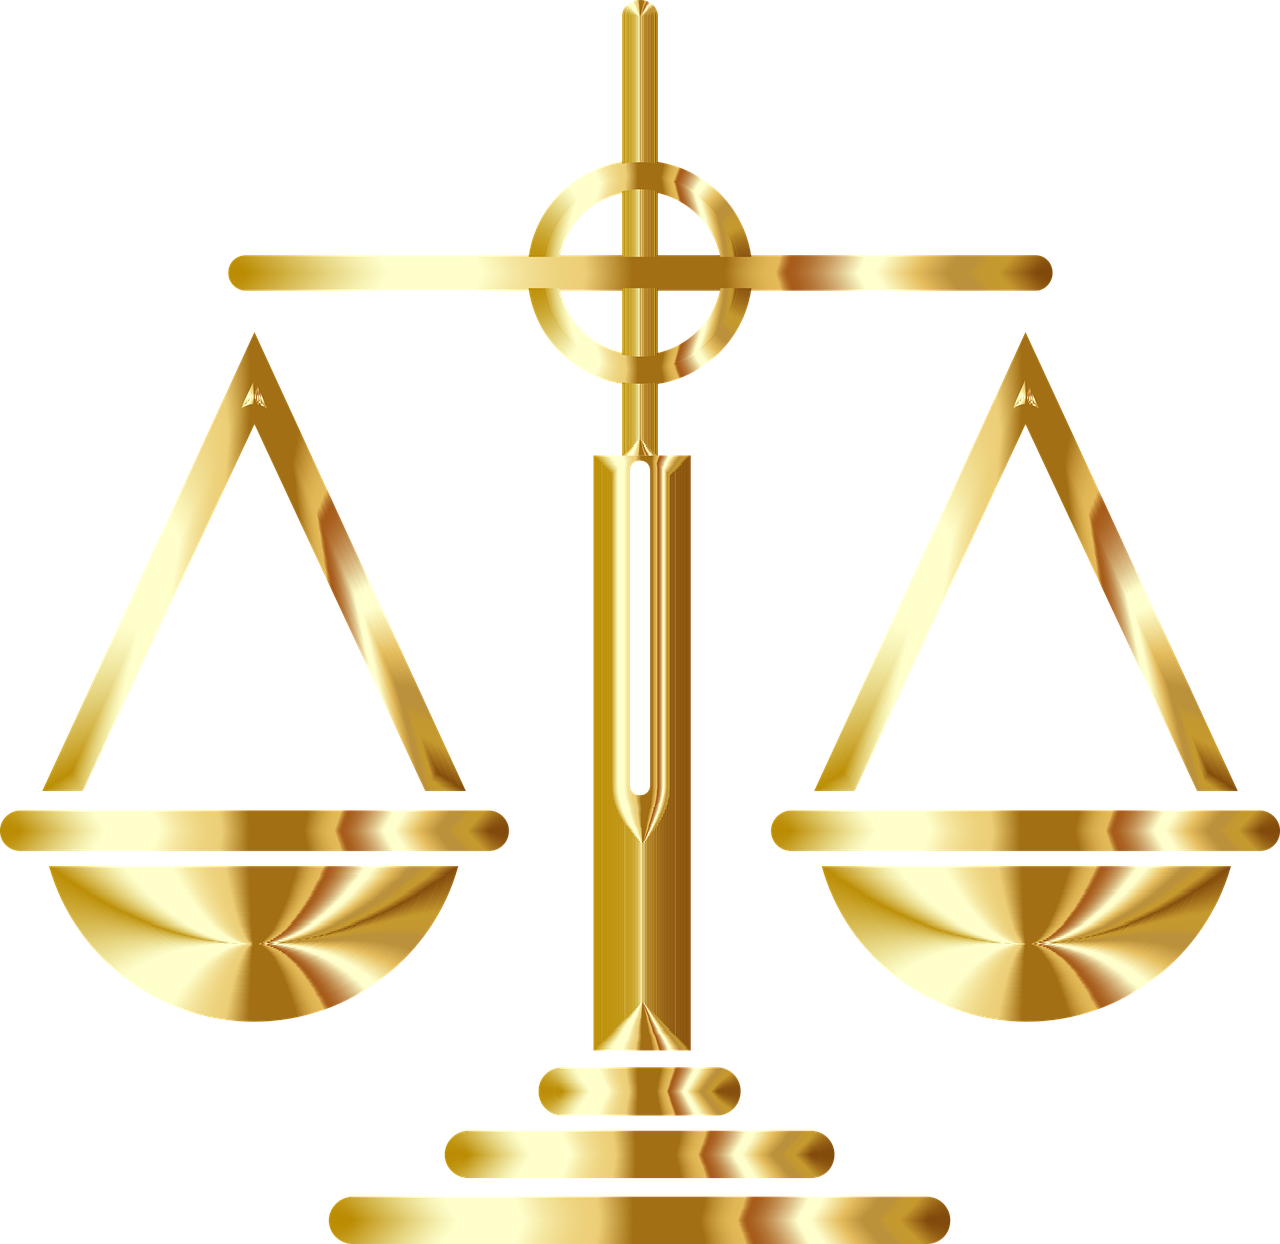 justice clipart federalist